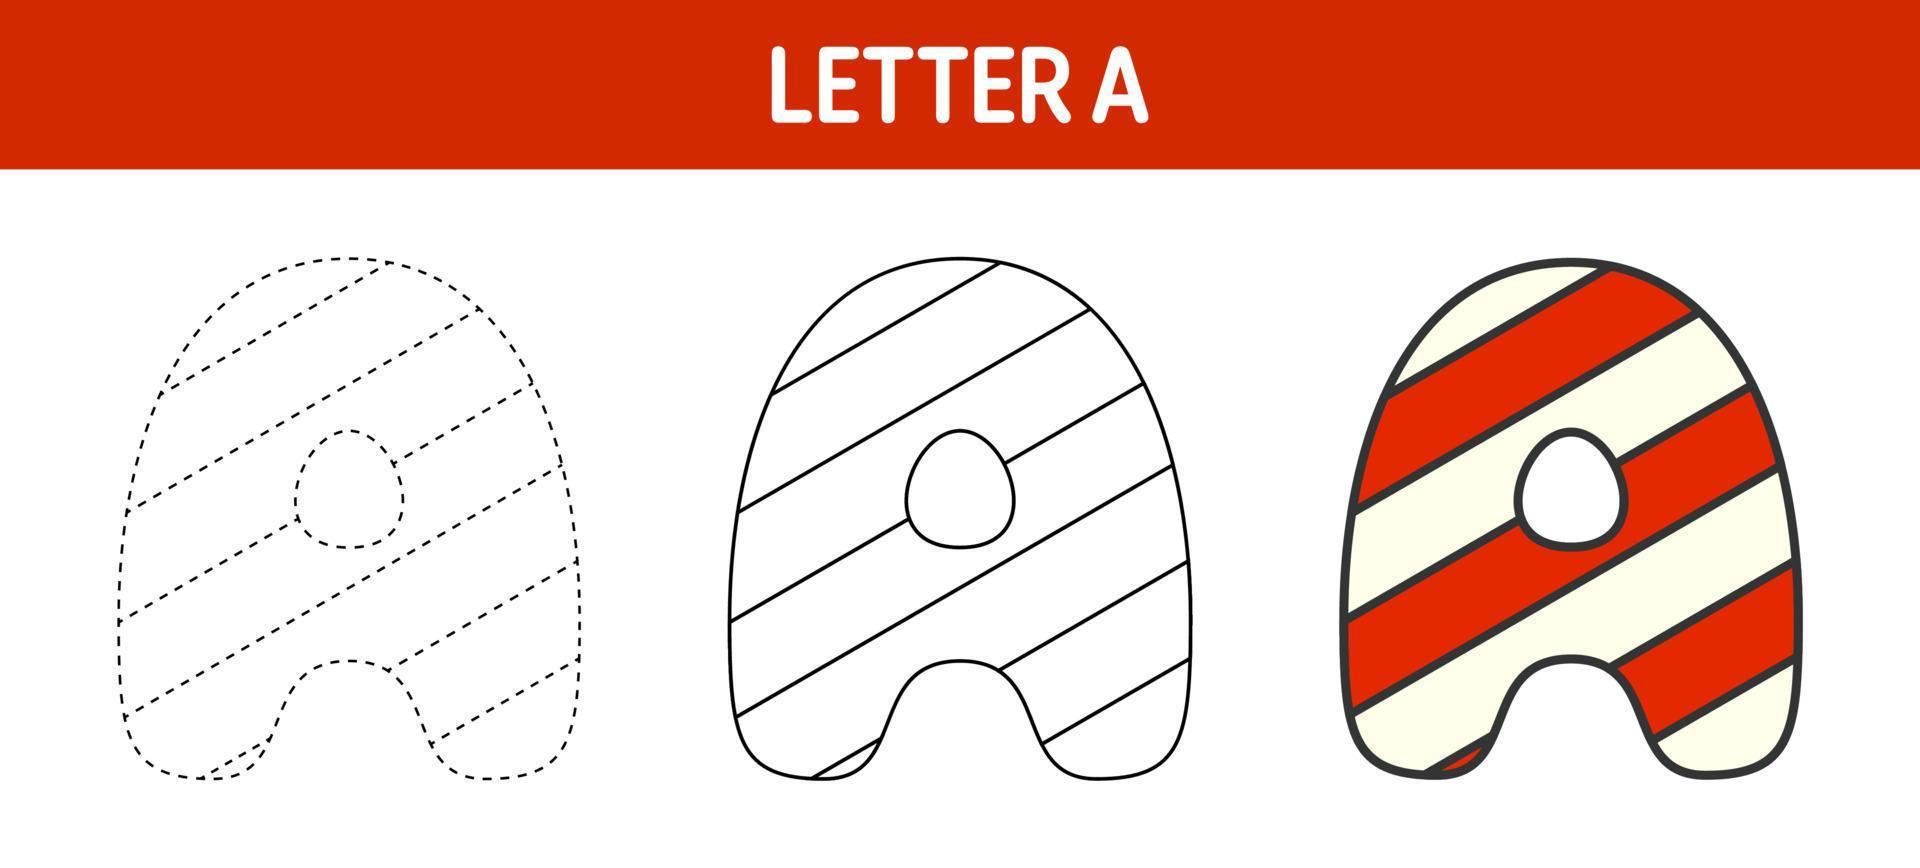 Letter A Candy Cane, tracing and coloring worksheet for kids vector